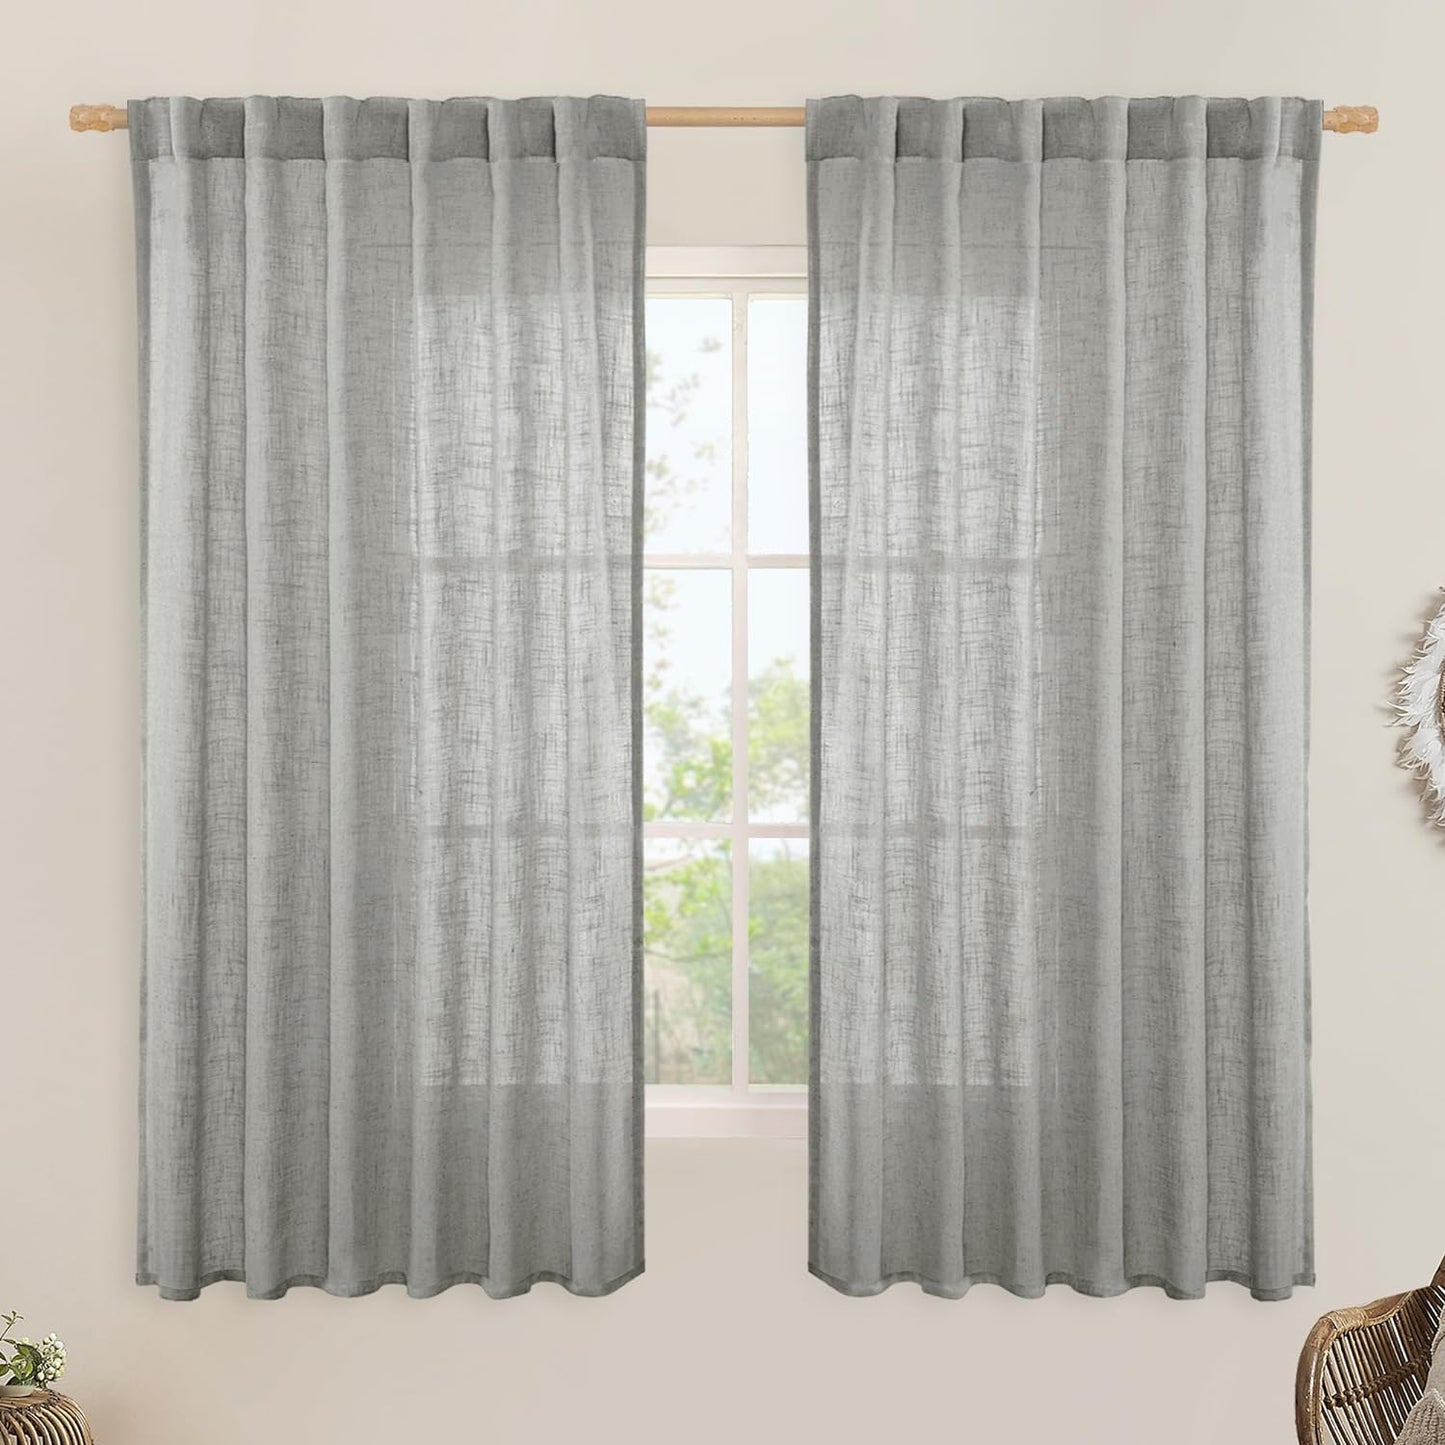 LAMIT Natural Linen Blended Curtains for Living Room, Back Tab and Rod Pocket Semi Sheer Curtains Light Filtering Country Rustic Drapes for Bedroom/Farmhouse, 2 Panels,52 X 108 Inch, Linen  LAMIT Grey 52W X 63L 